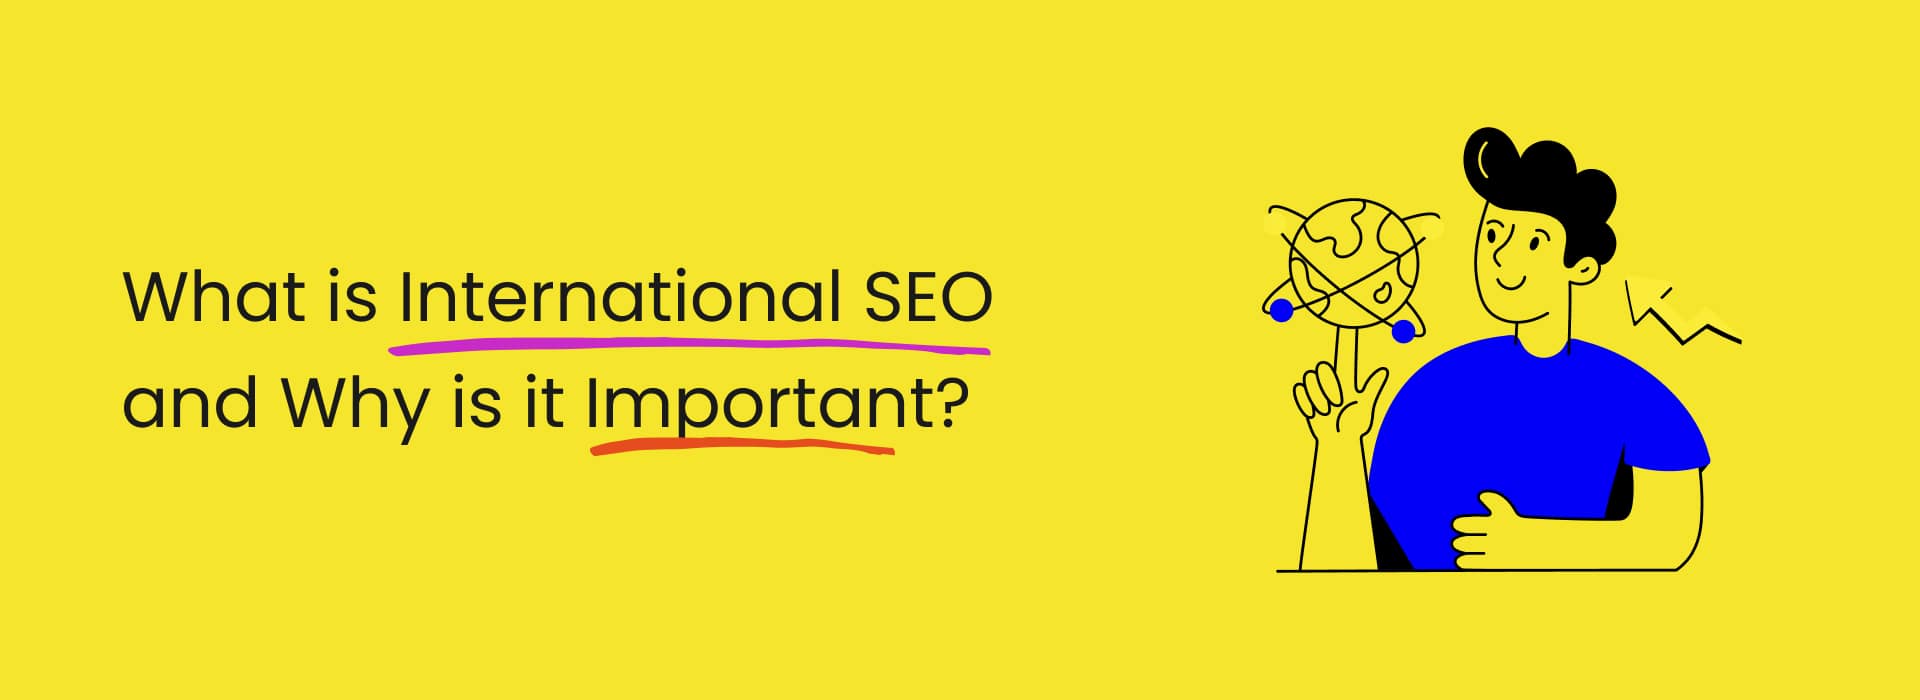 What-is-International-SEO-and-why-is-it-Important